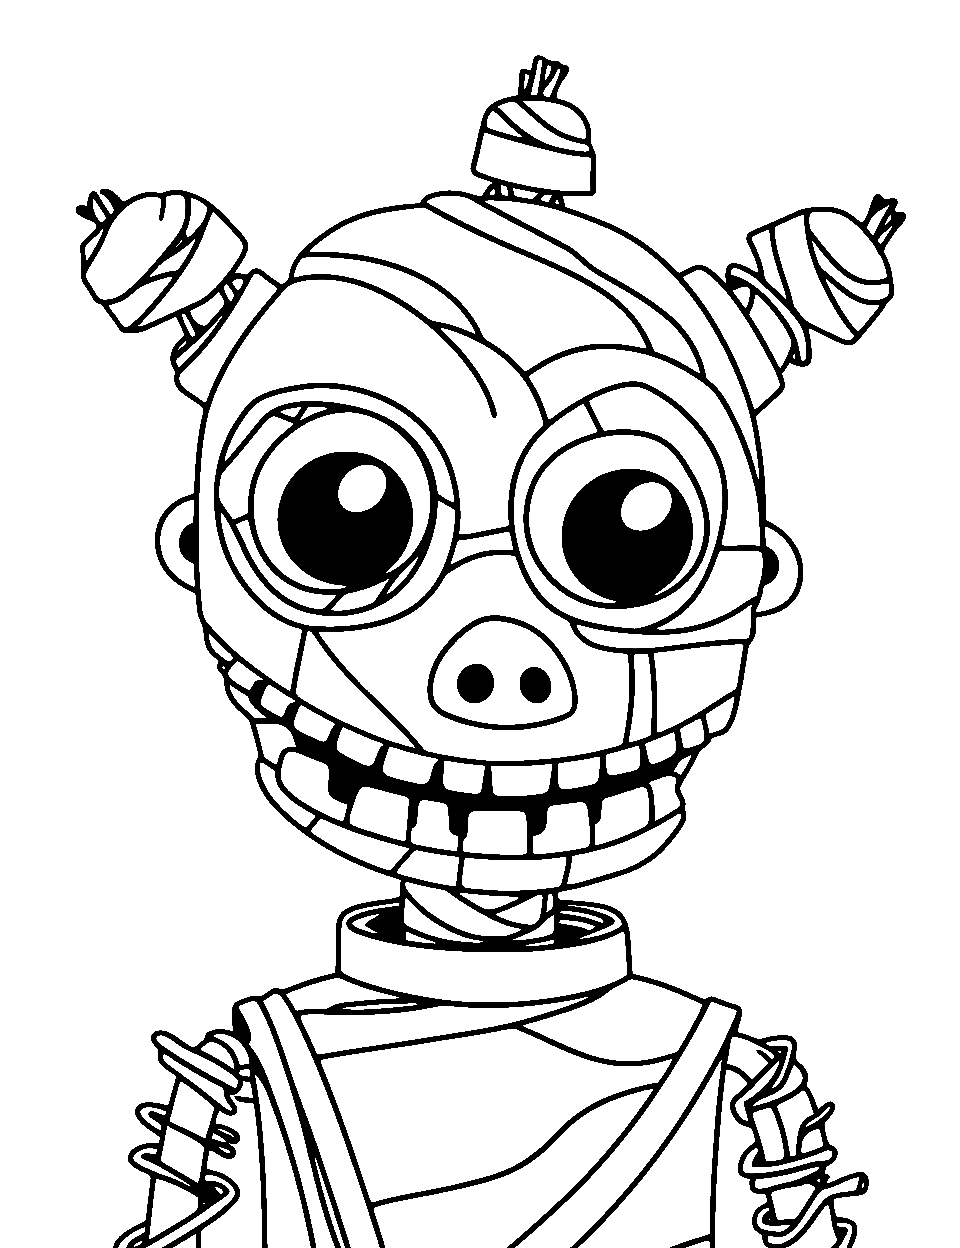 Five Nights At Freddy's (FNAF) Coloring Pages Printable for Free Download